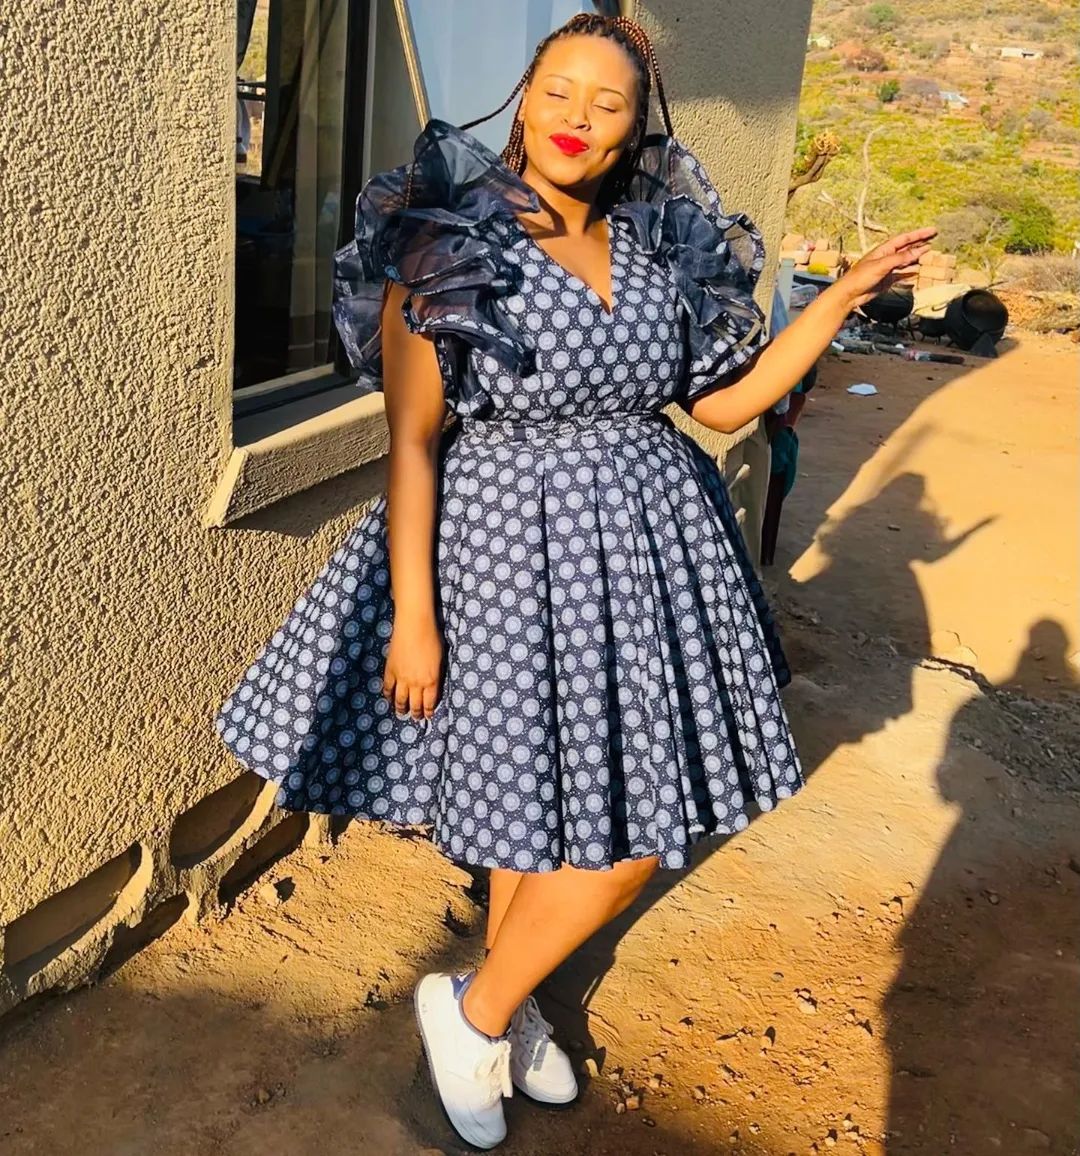 Tswana Traditional Dresses: The Perfect Blend of Tradition and Style 1